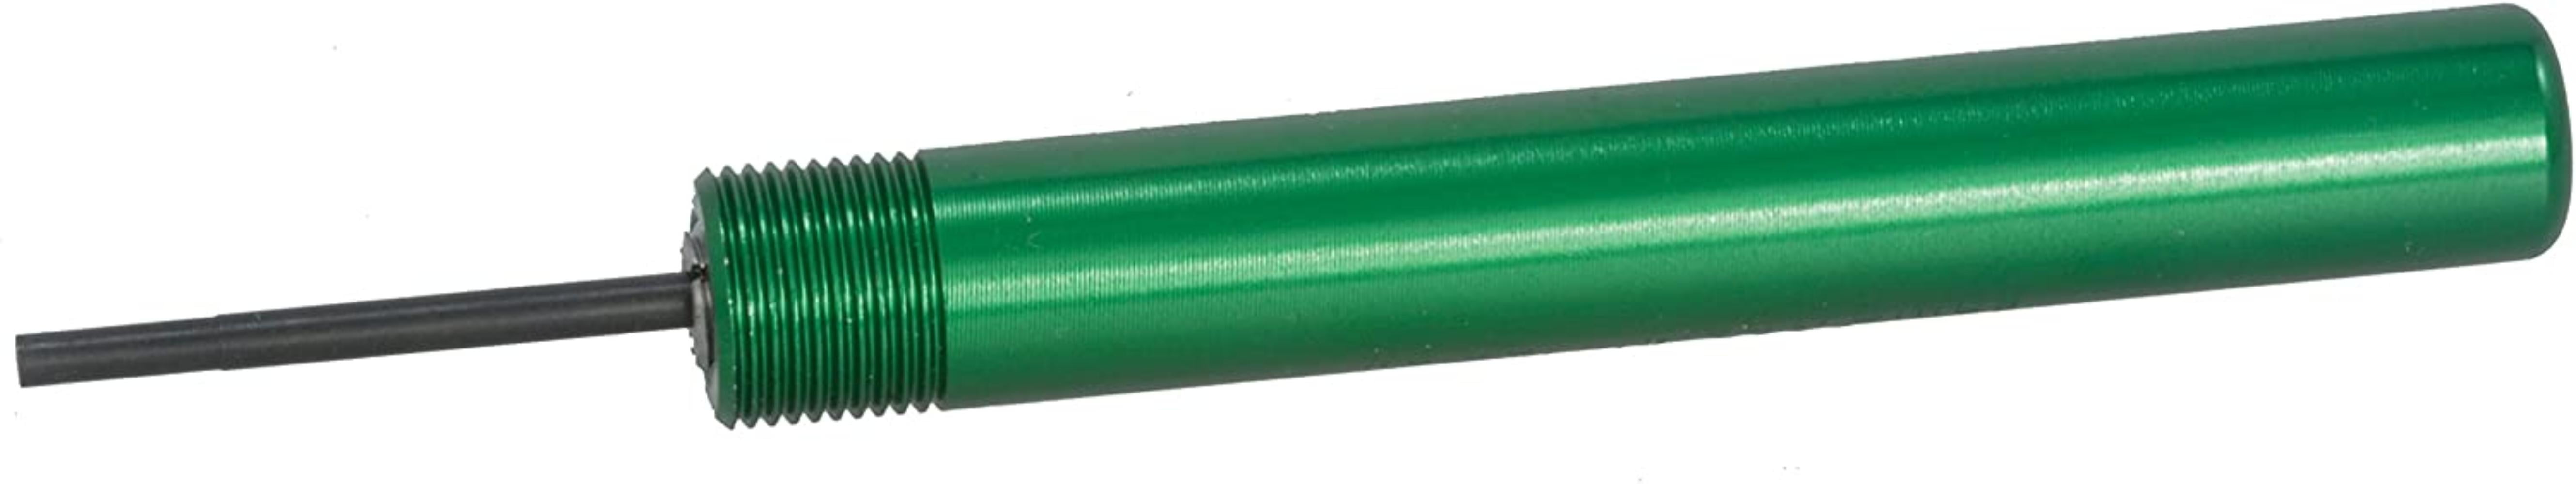 0.062 Contacts 18-30 AWG for 0.062 Diameter Pins Brass Color Waldom W-HT-2285 Tool Extractor